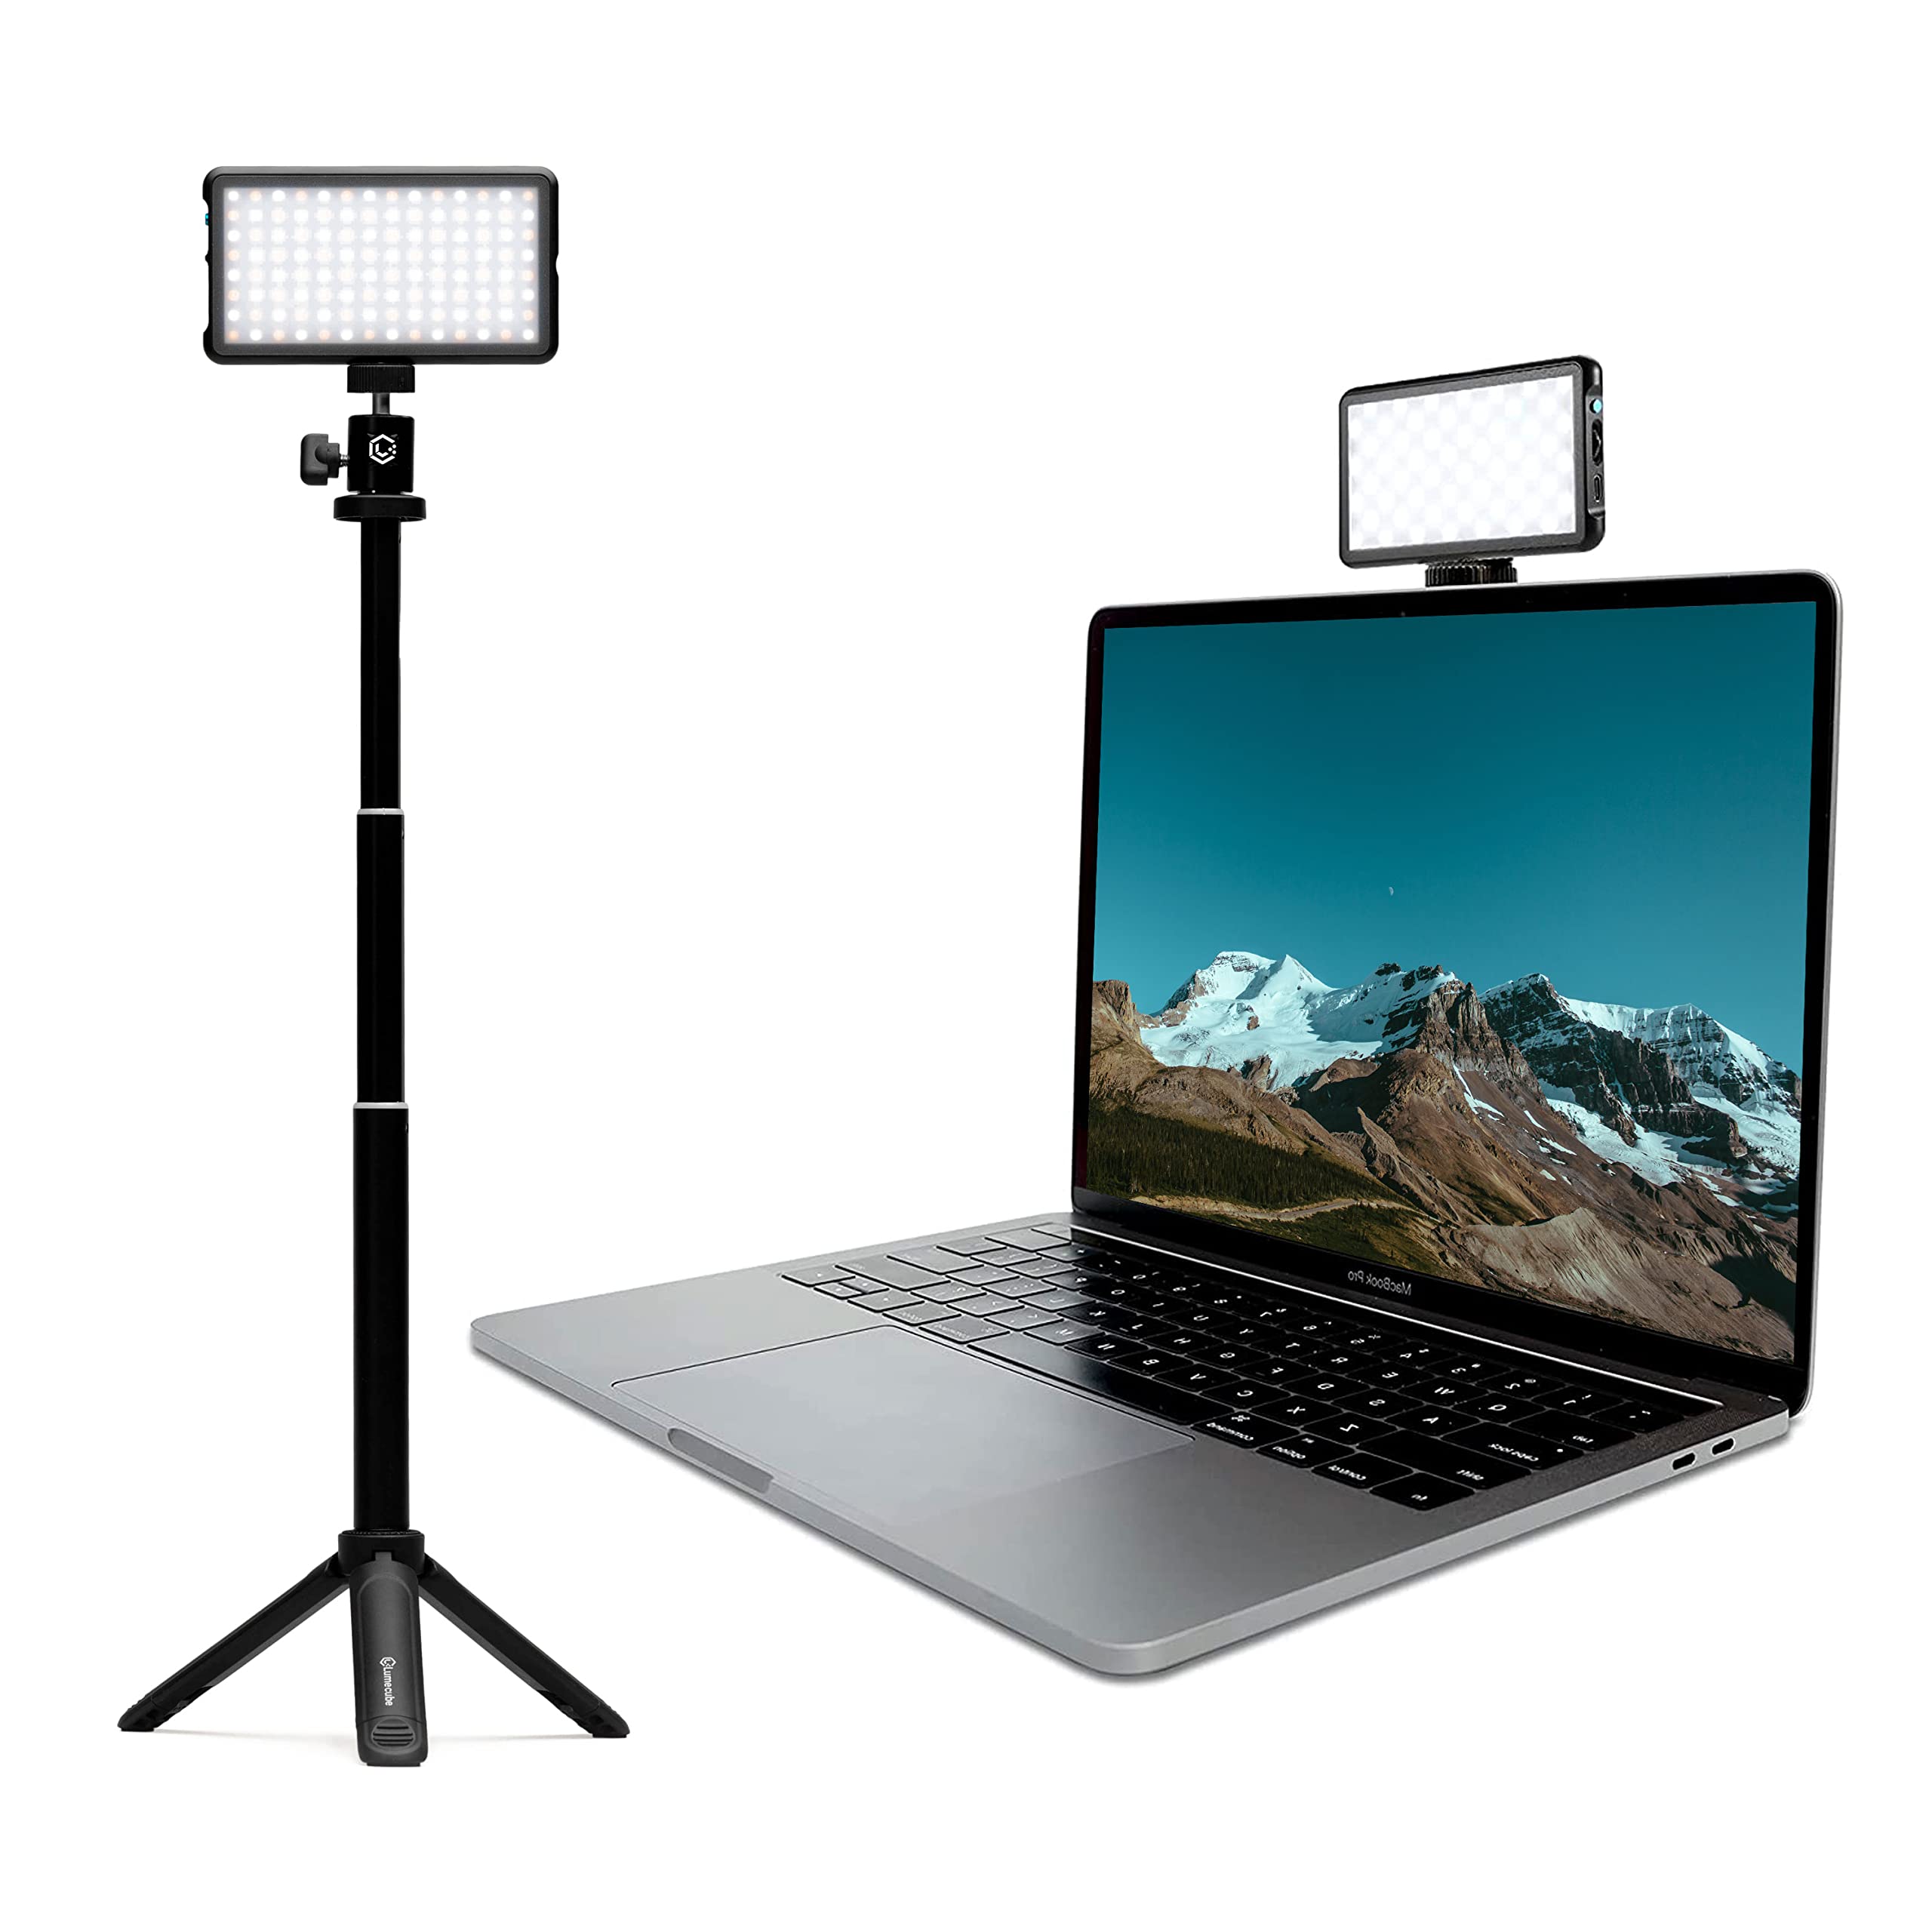 Lume Cube Broadcast Lighting Kit | Zoom Lighting, Webcam Light for Computer | Video Conference Lighting Kit for Laptop with Adjustable Brightness & Color Temperature, Tripod & Suction Mount Included